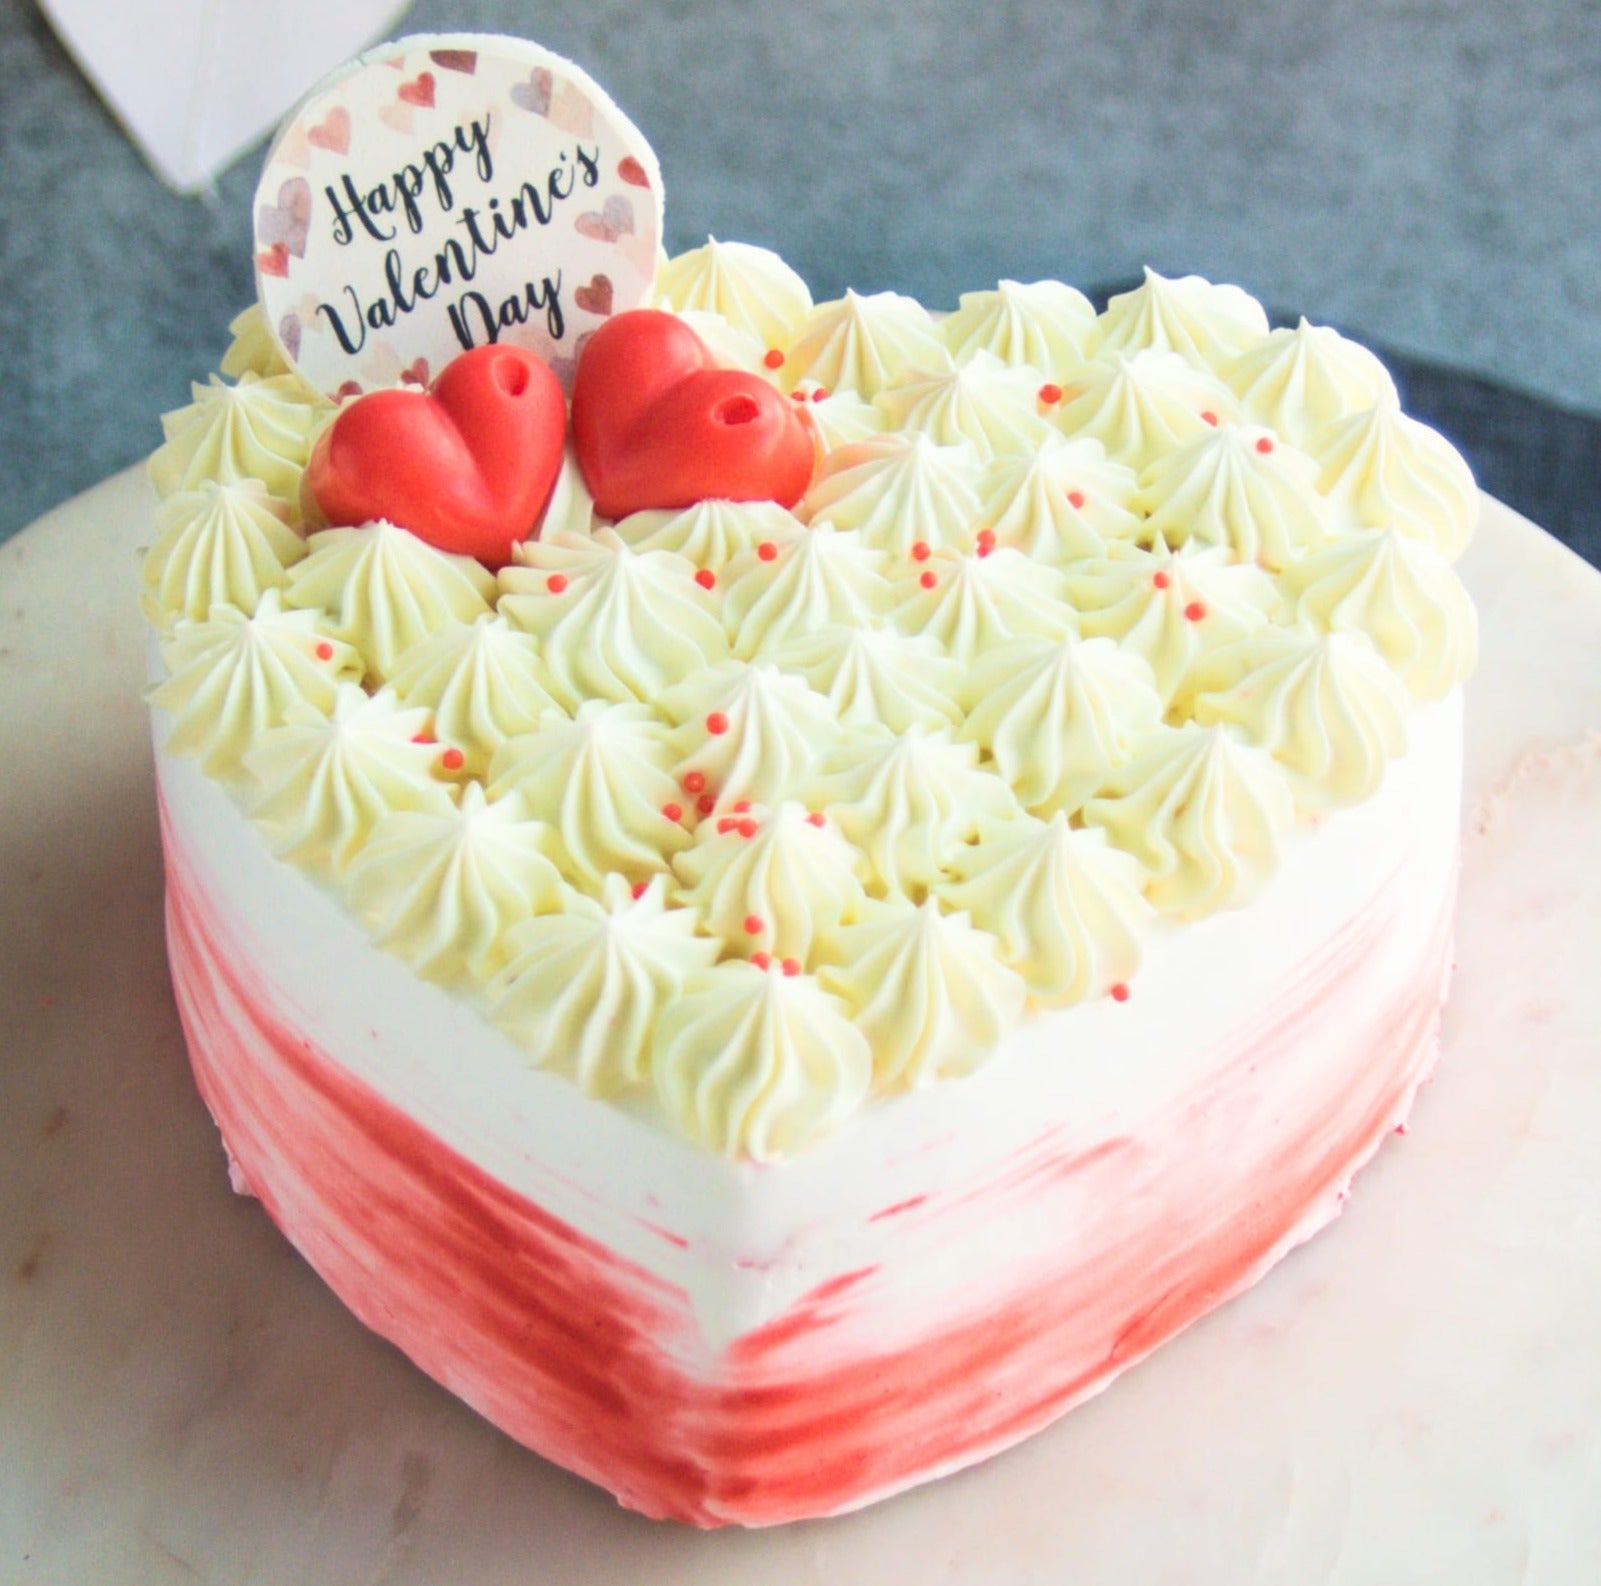 Send Red Velvet Heart Cake Online Delivery | Kanpur Gifts